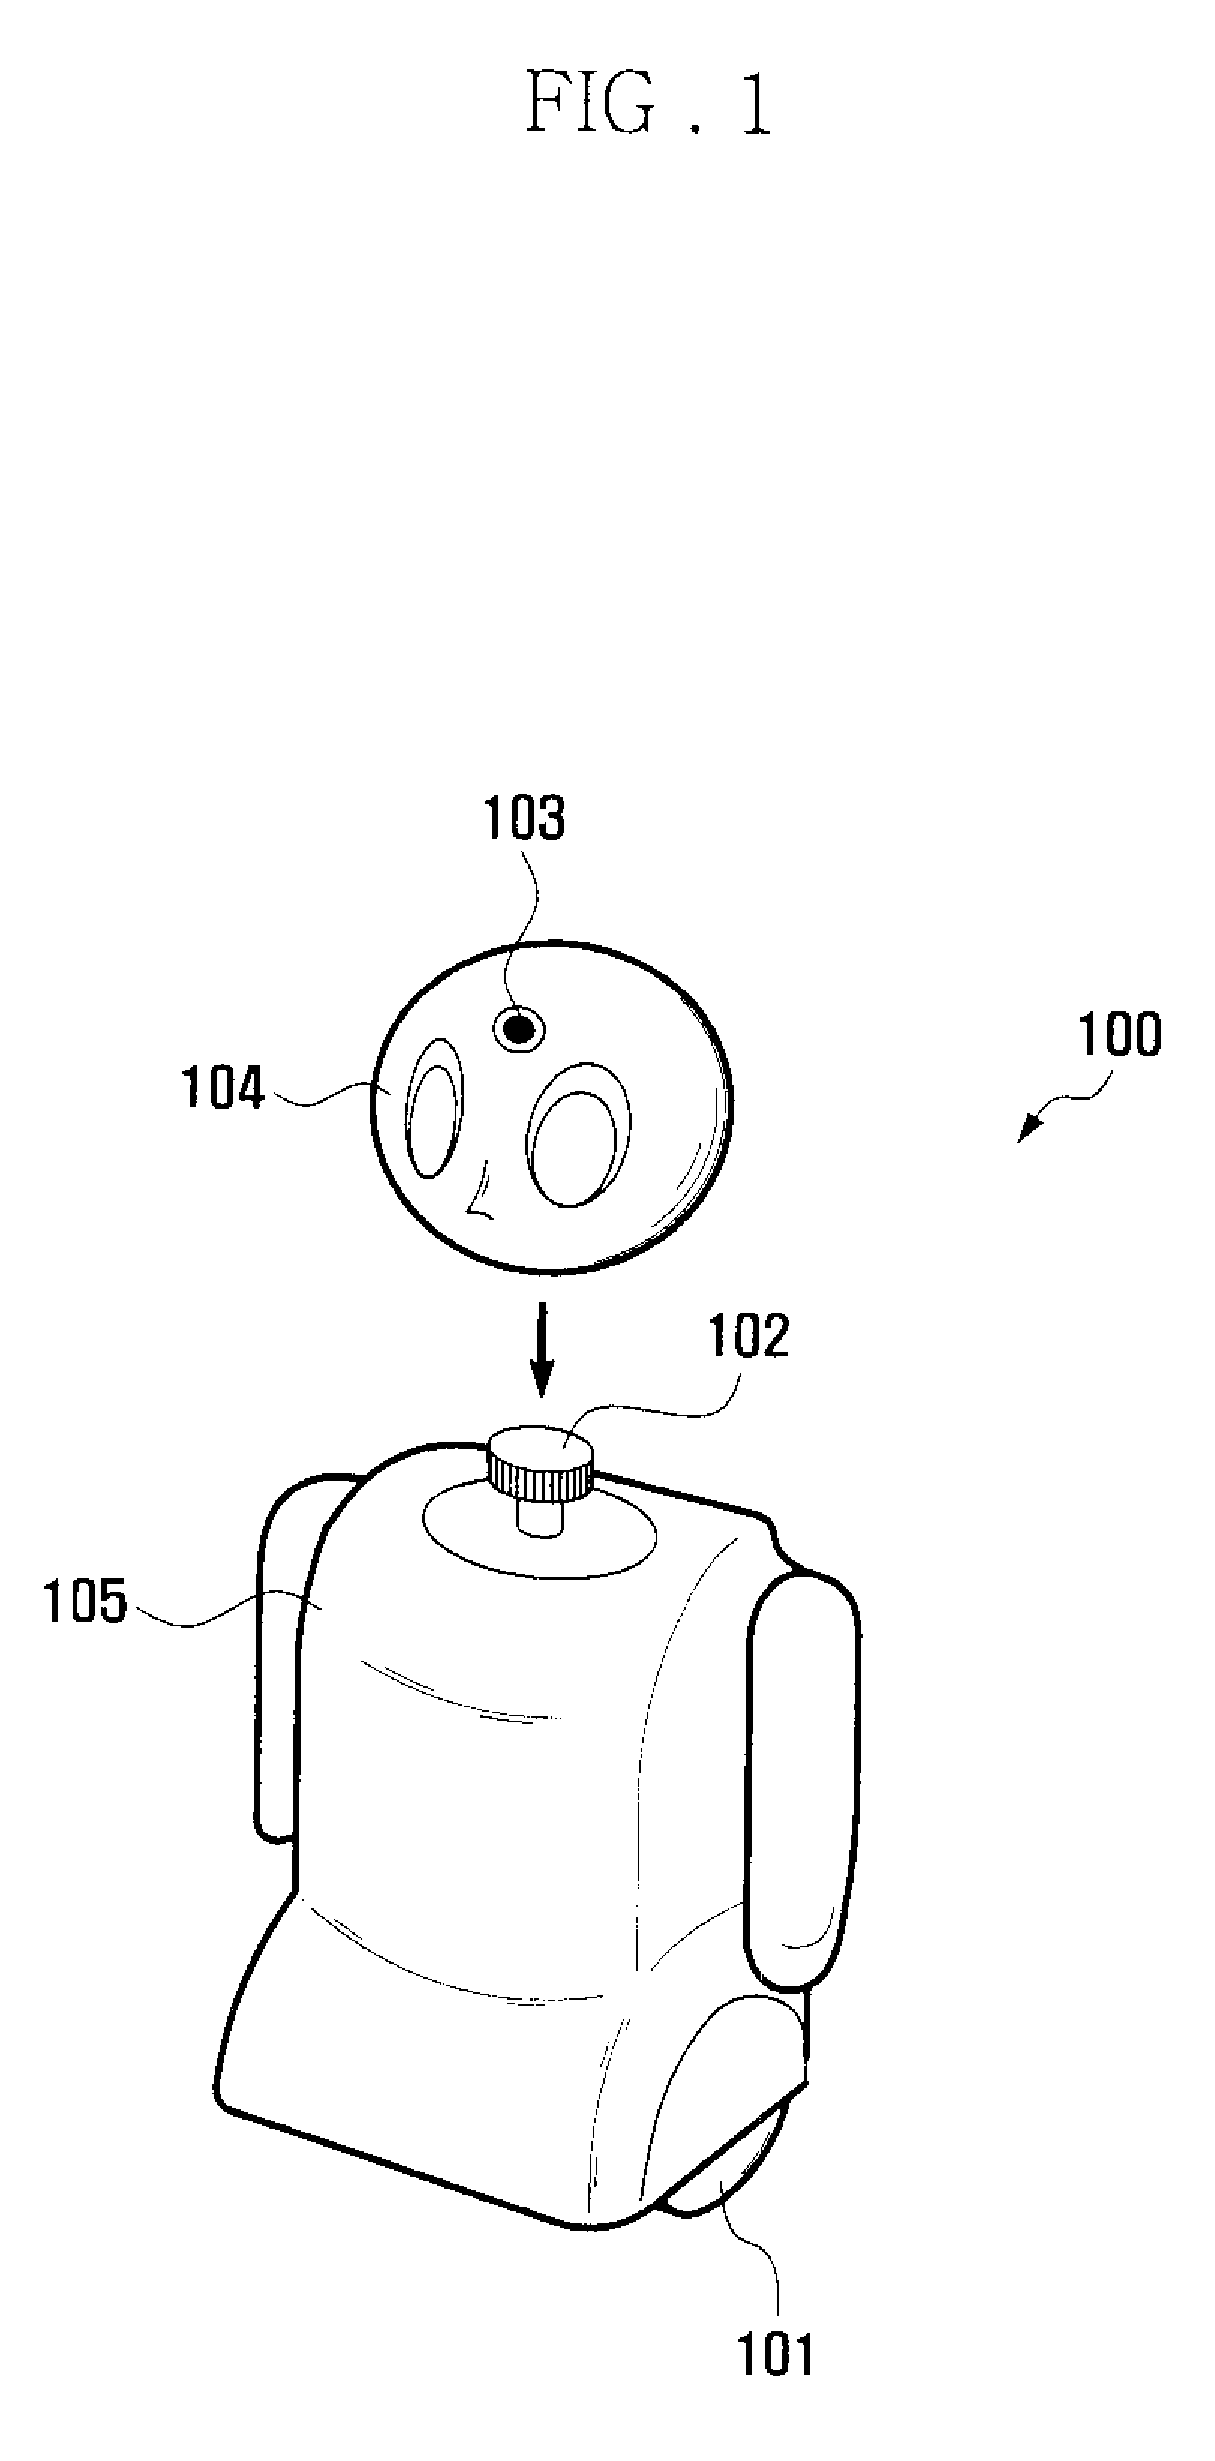 Image-based self-diagnosis apparatus and method for robot